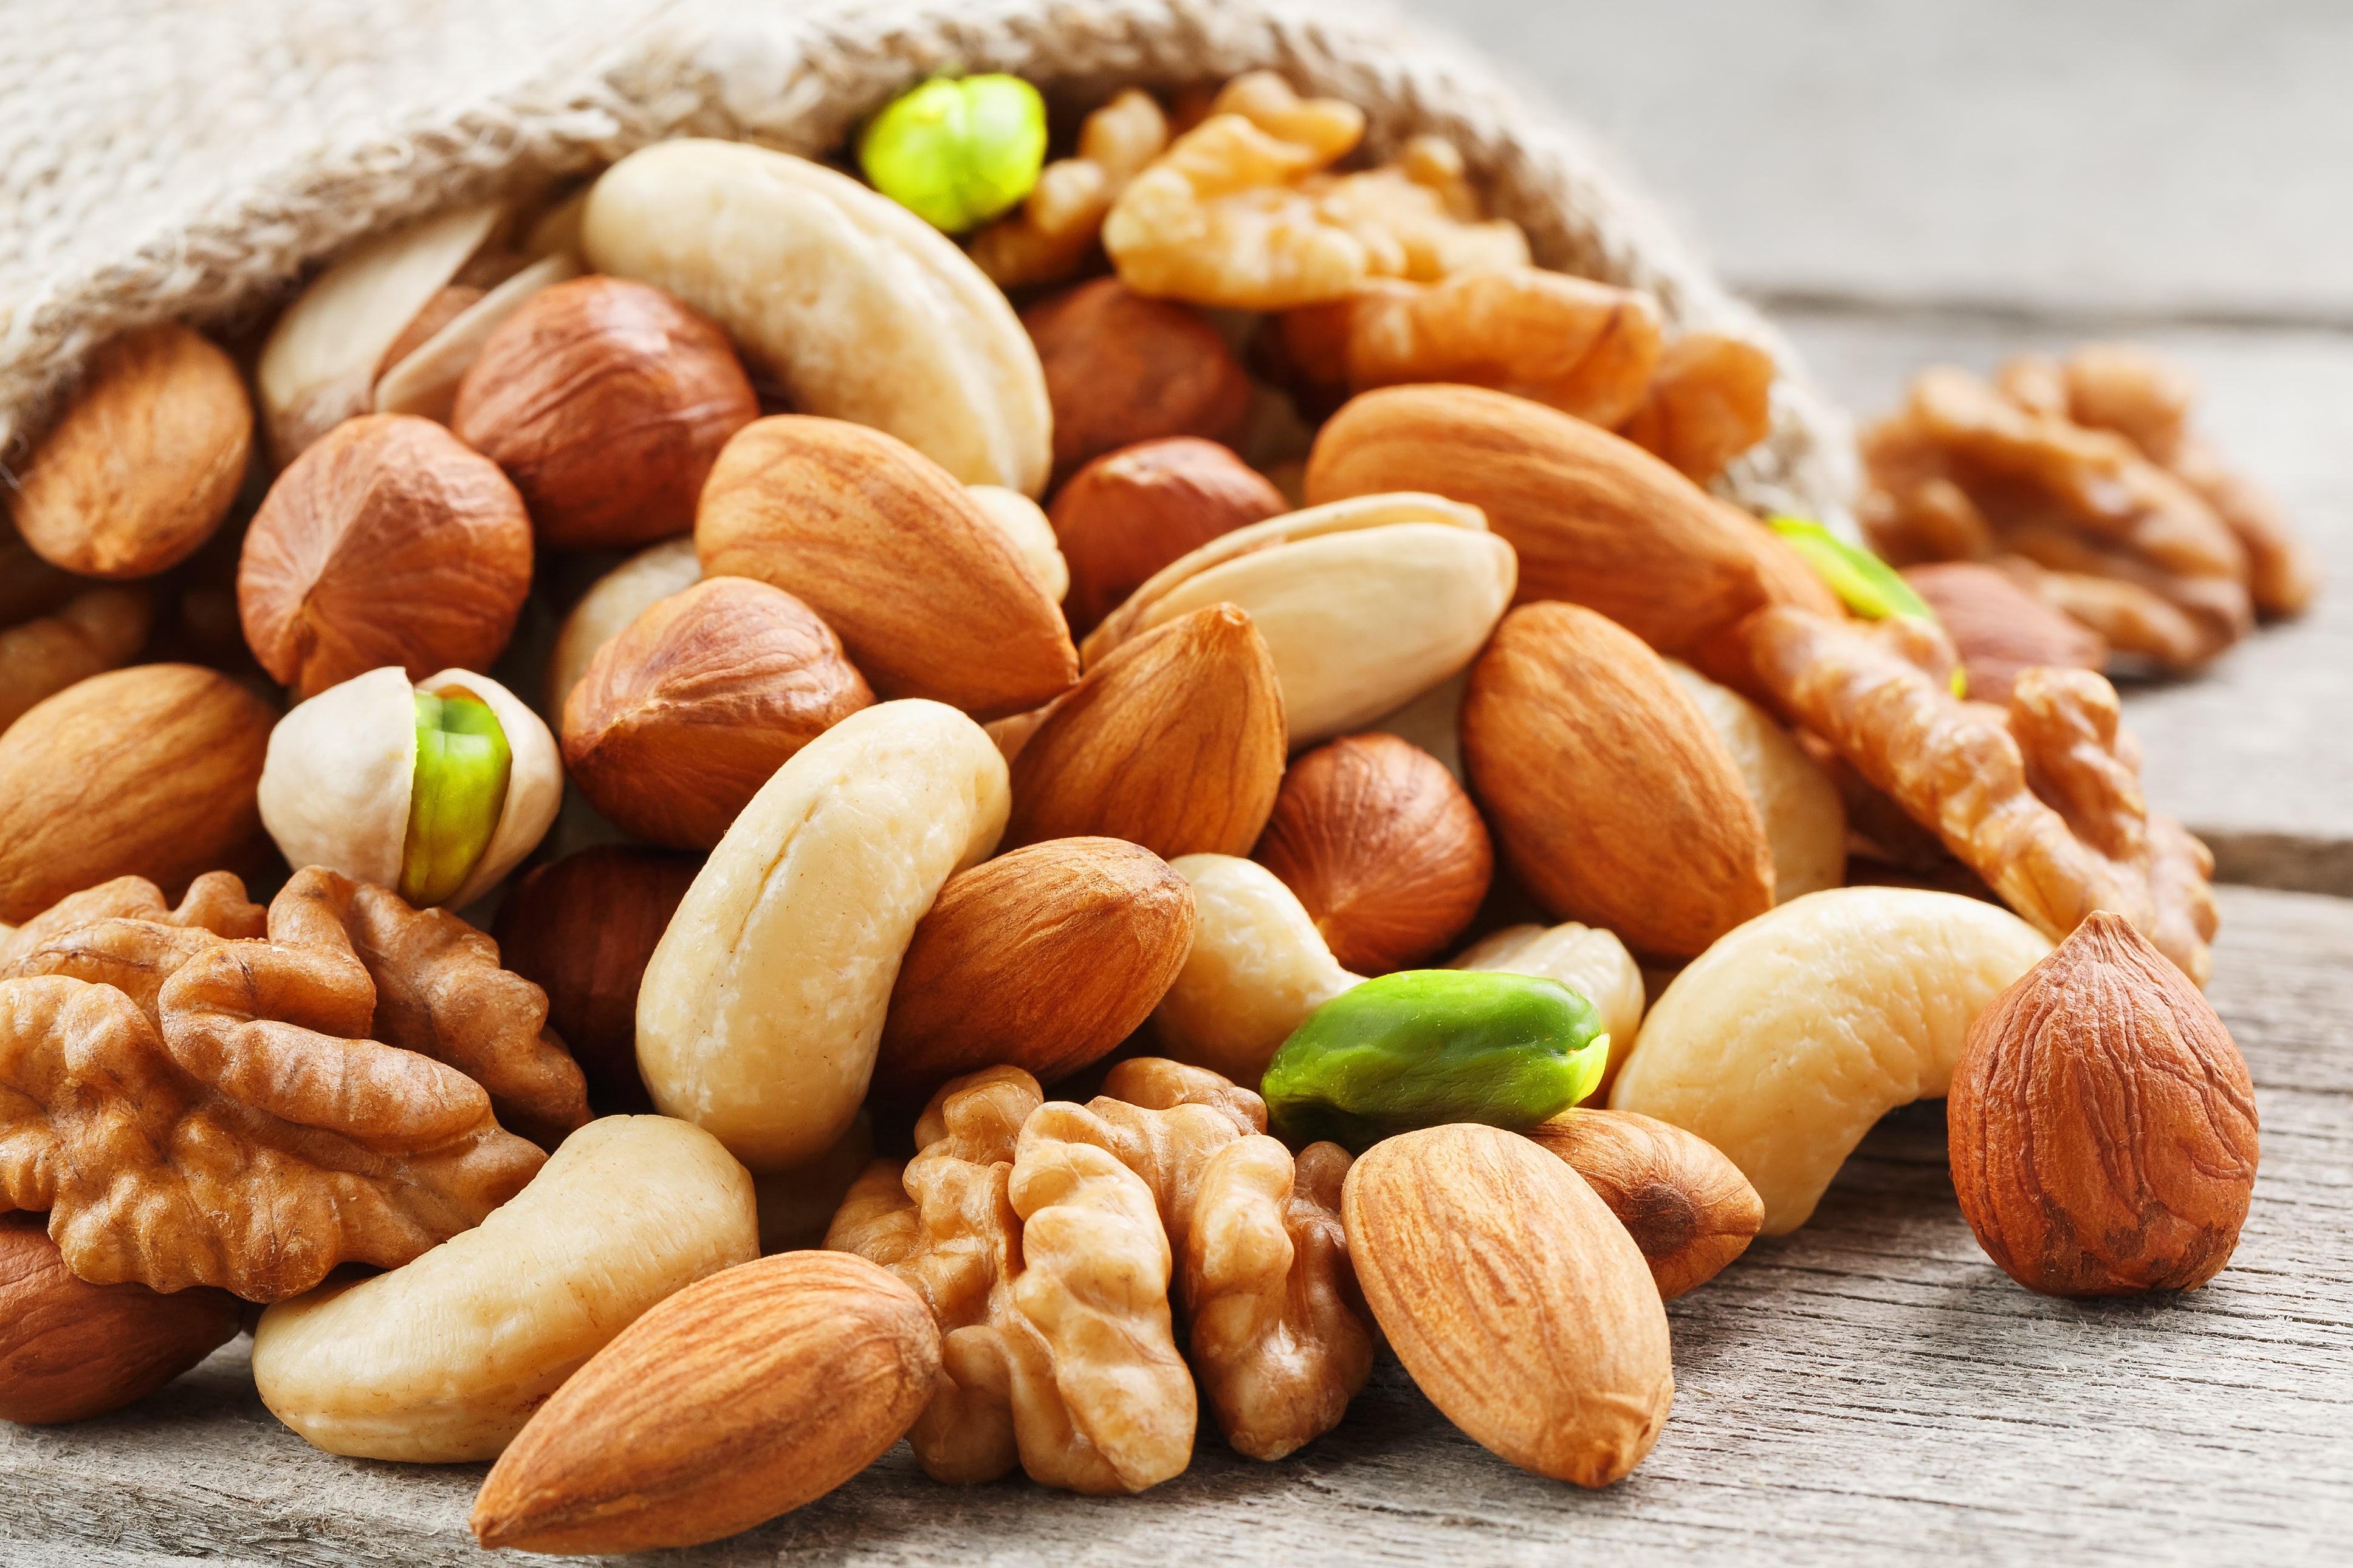 We’re nuts about nuts- and you should be, too